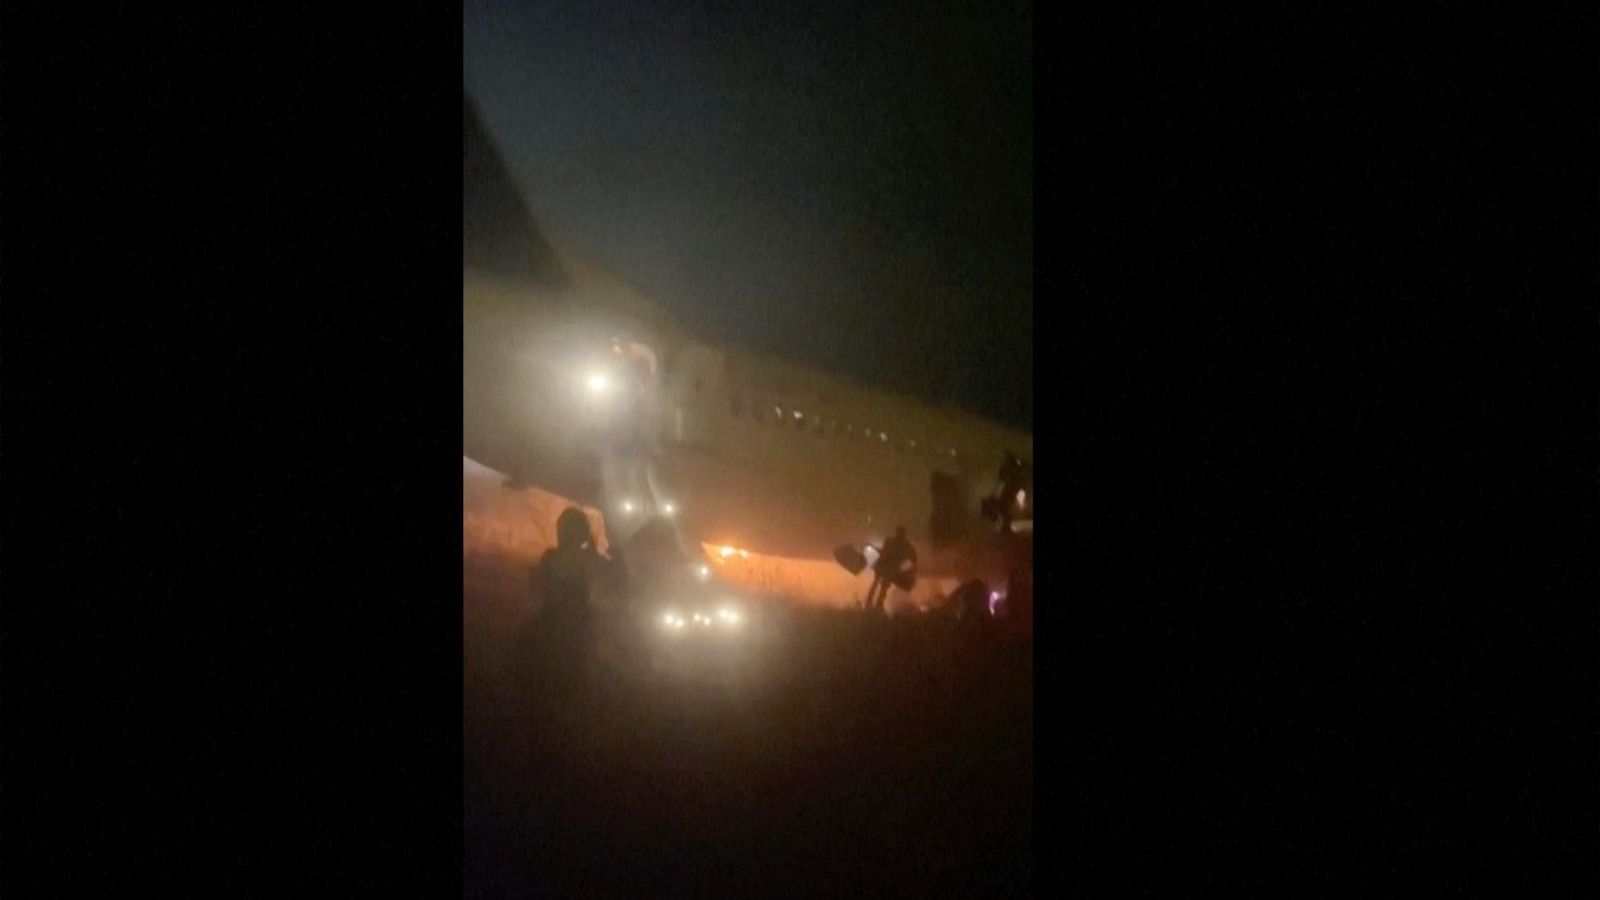 Boeing 737 catches fire and skids off the runway at an airport in Senegal.  Ten people are injured